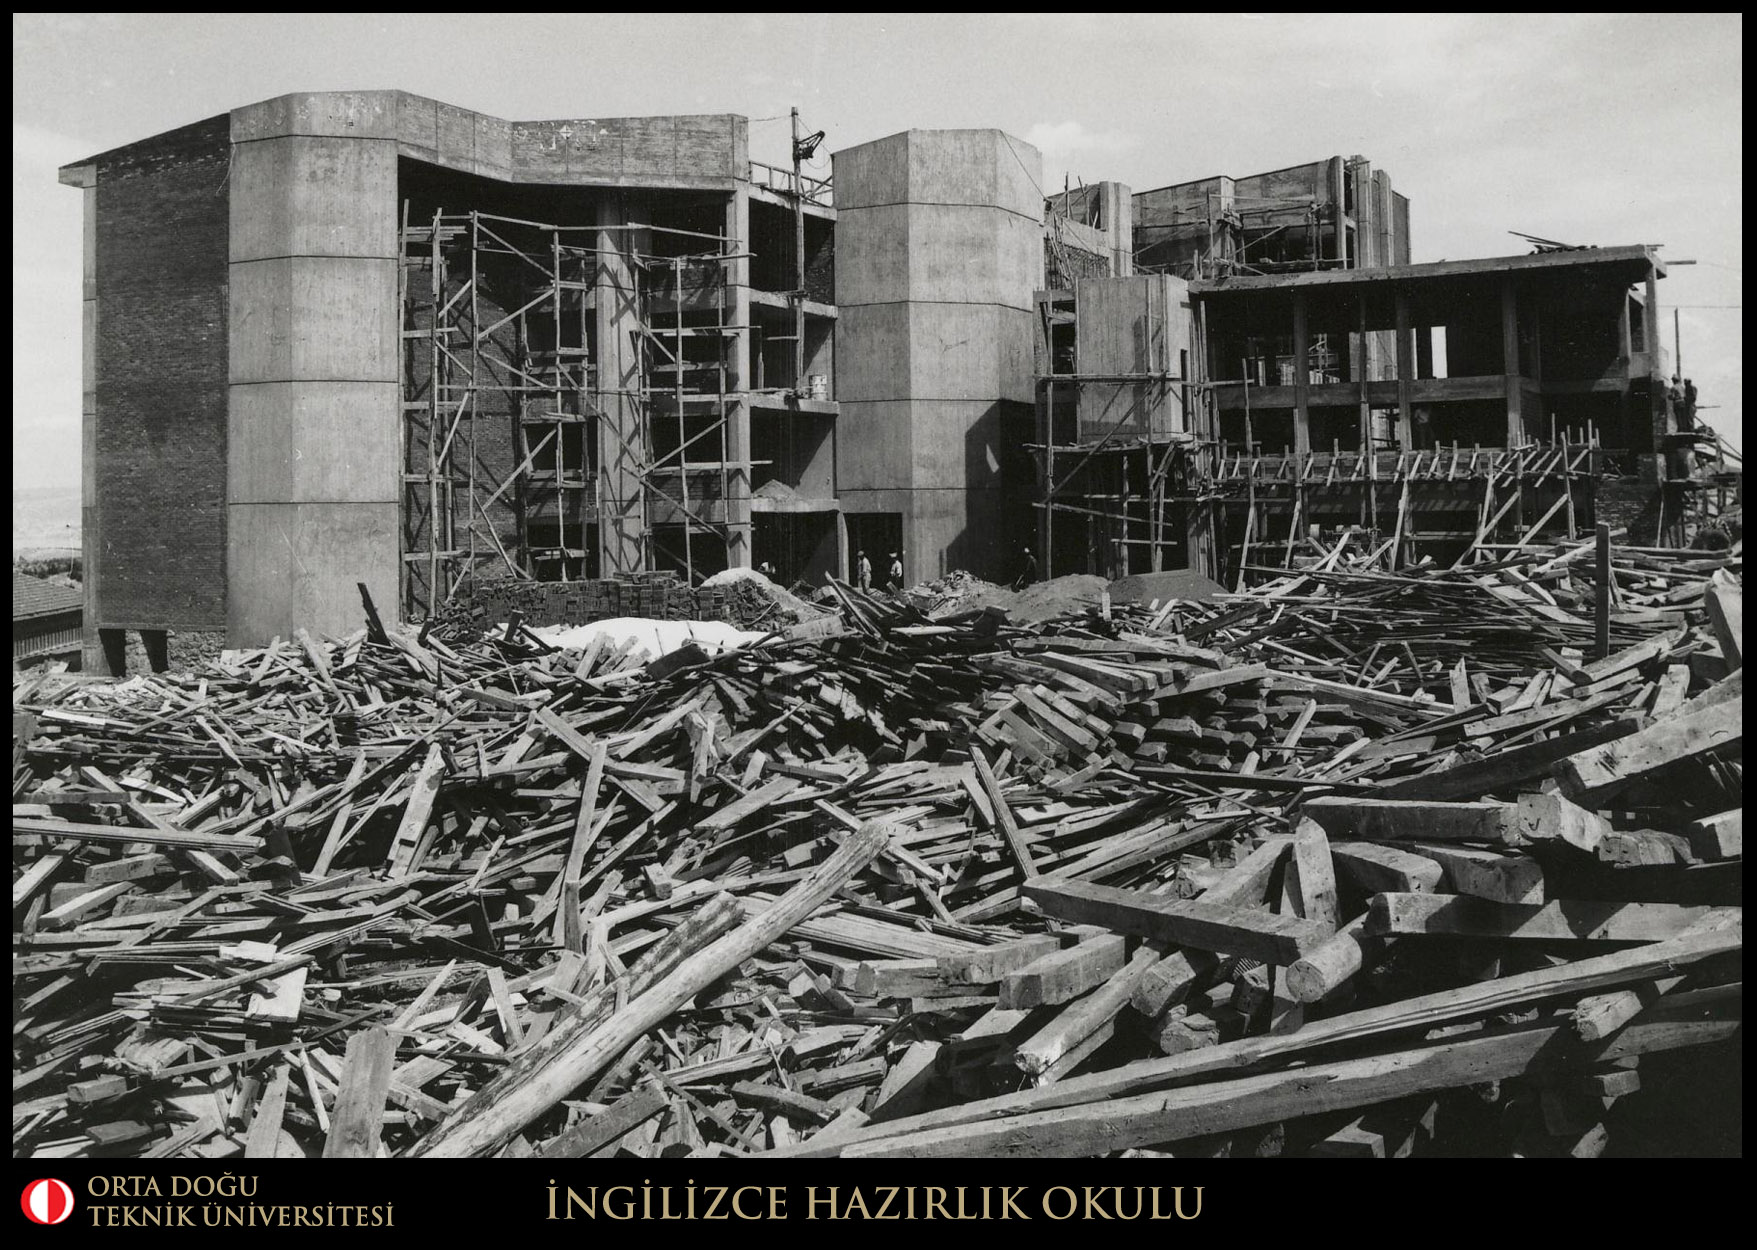 The construction of  School of Foreign Languages